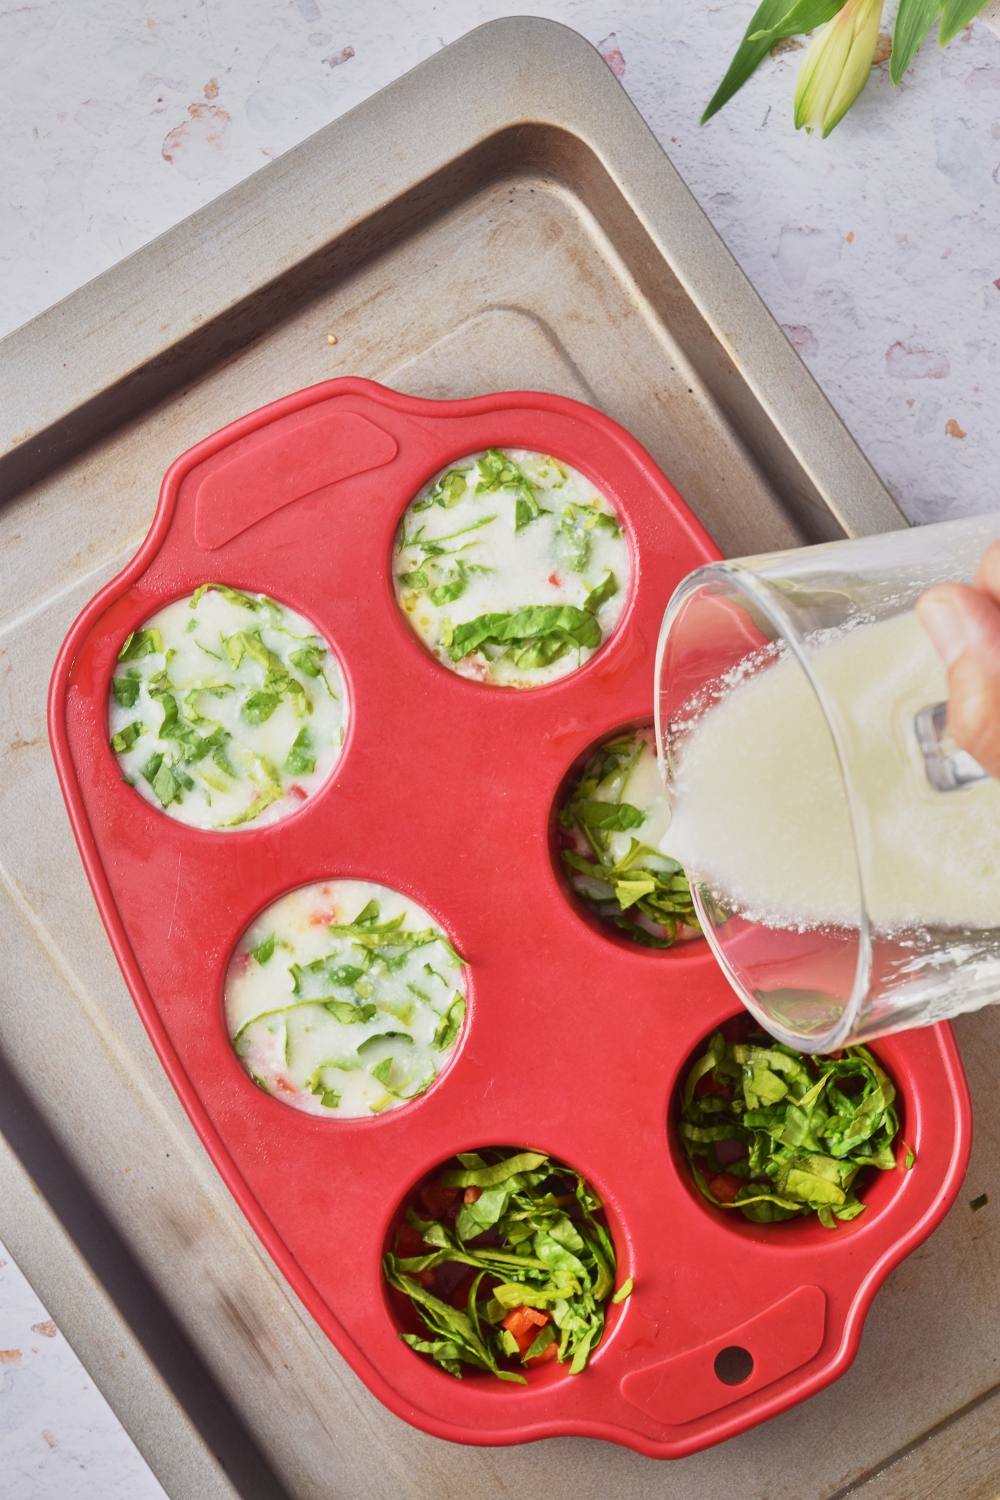 A baking sheet with a silicone muffin mold. A pitcher is pouring the egg mixture overtop the red peppers and spinach.